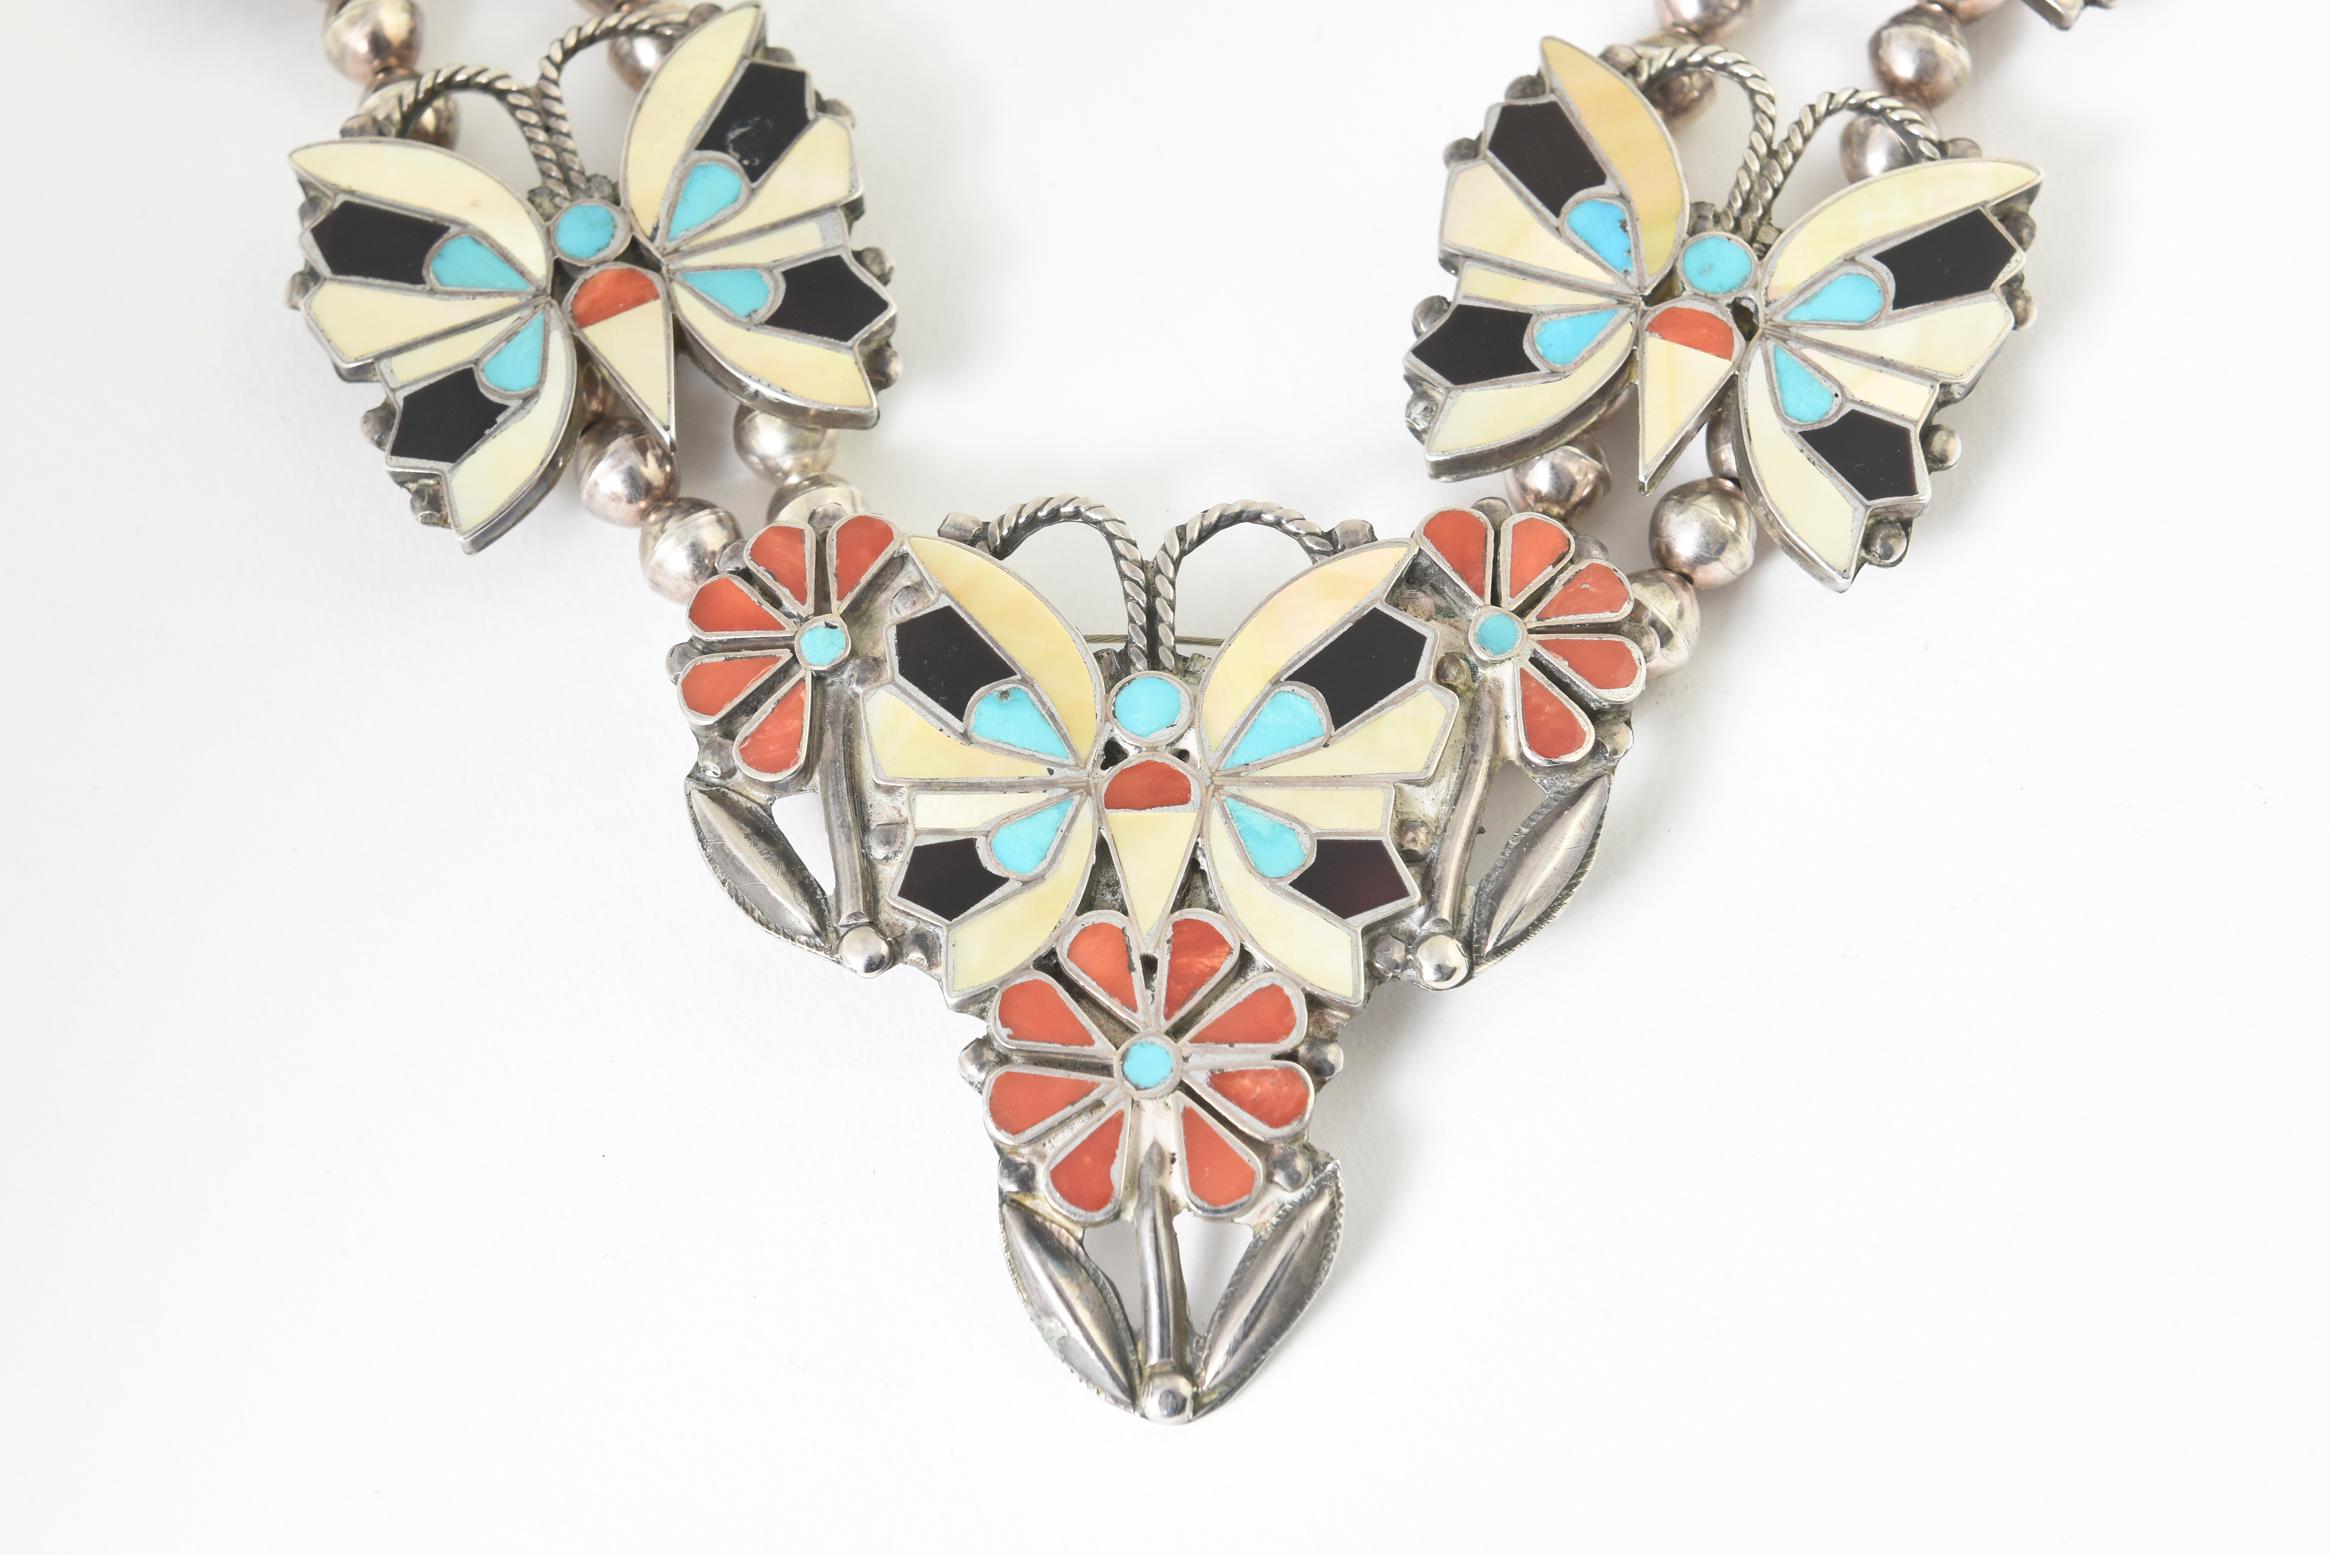 Zuni Inlaid Butterfly Squash Blossom Necklace and Bracelet by Rosita Wallace 1